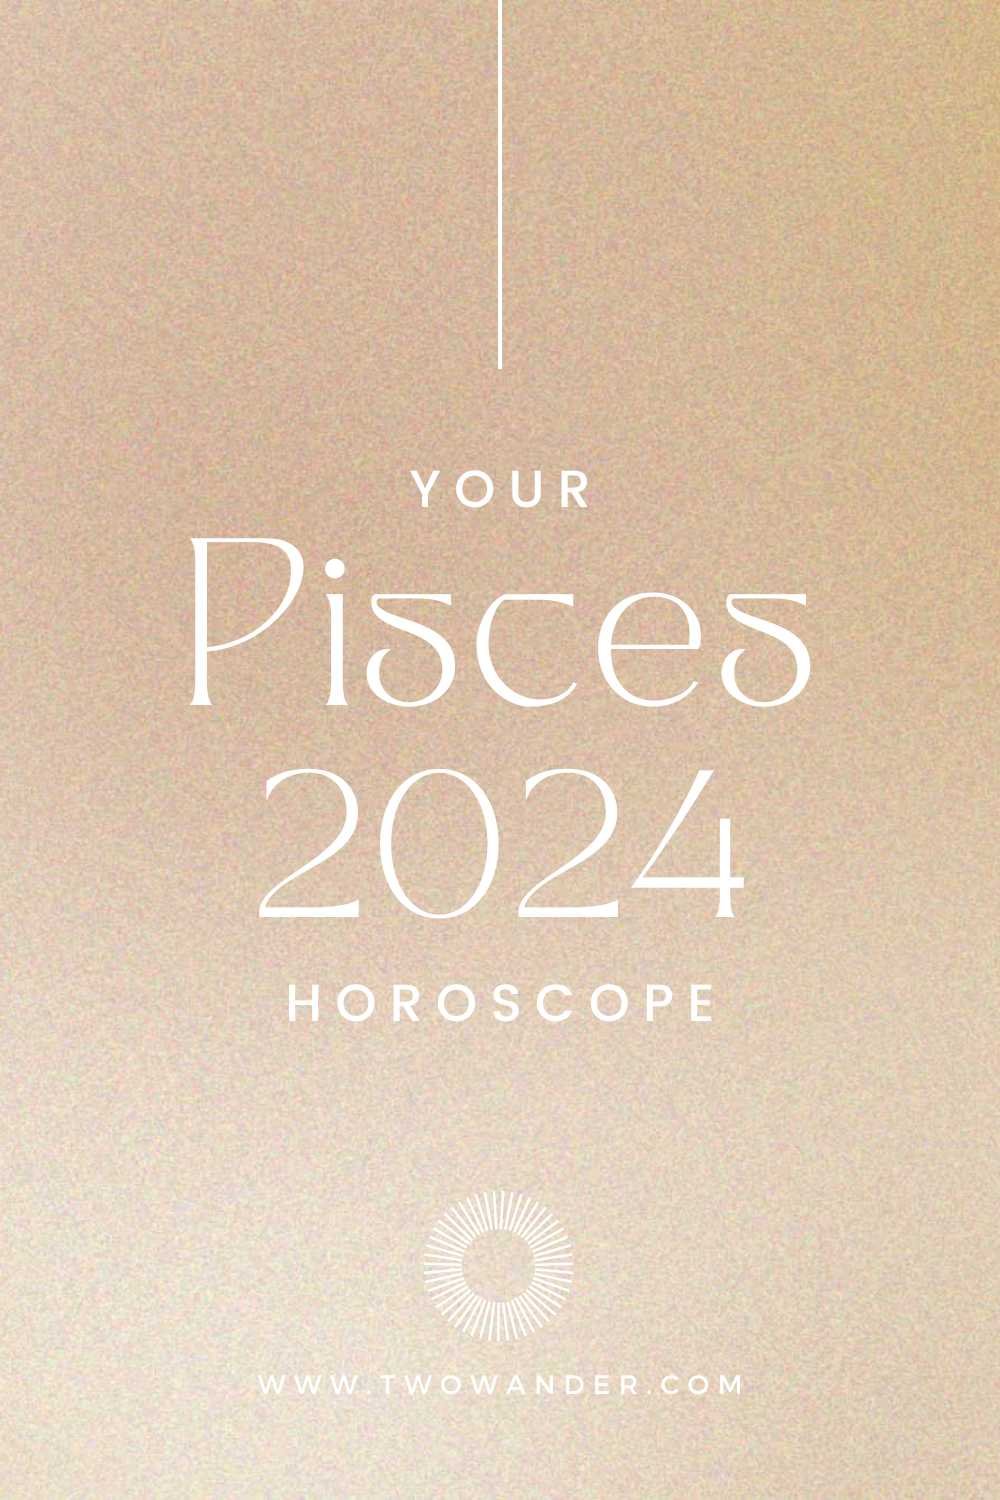 two-wander-pisces-2024-horoscope